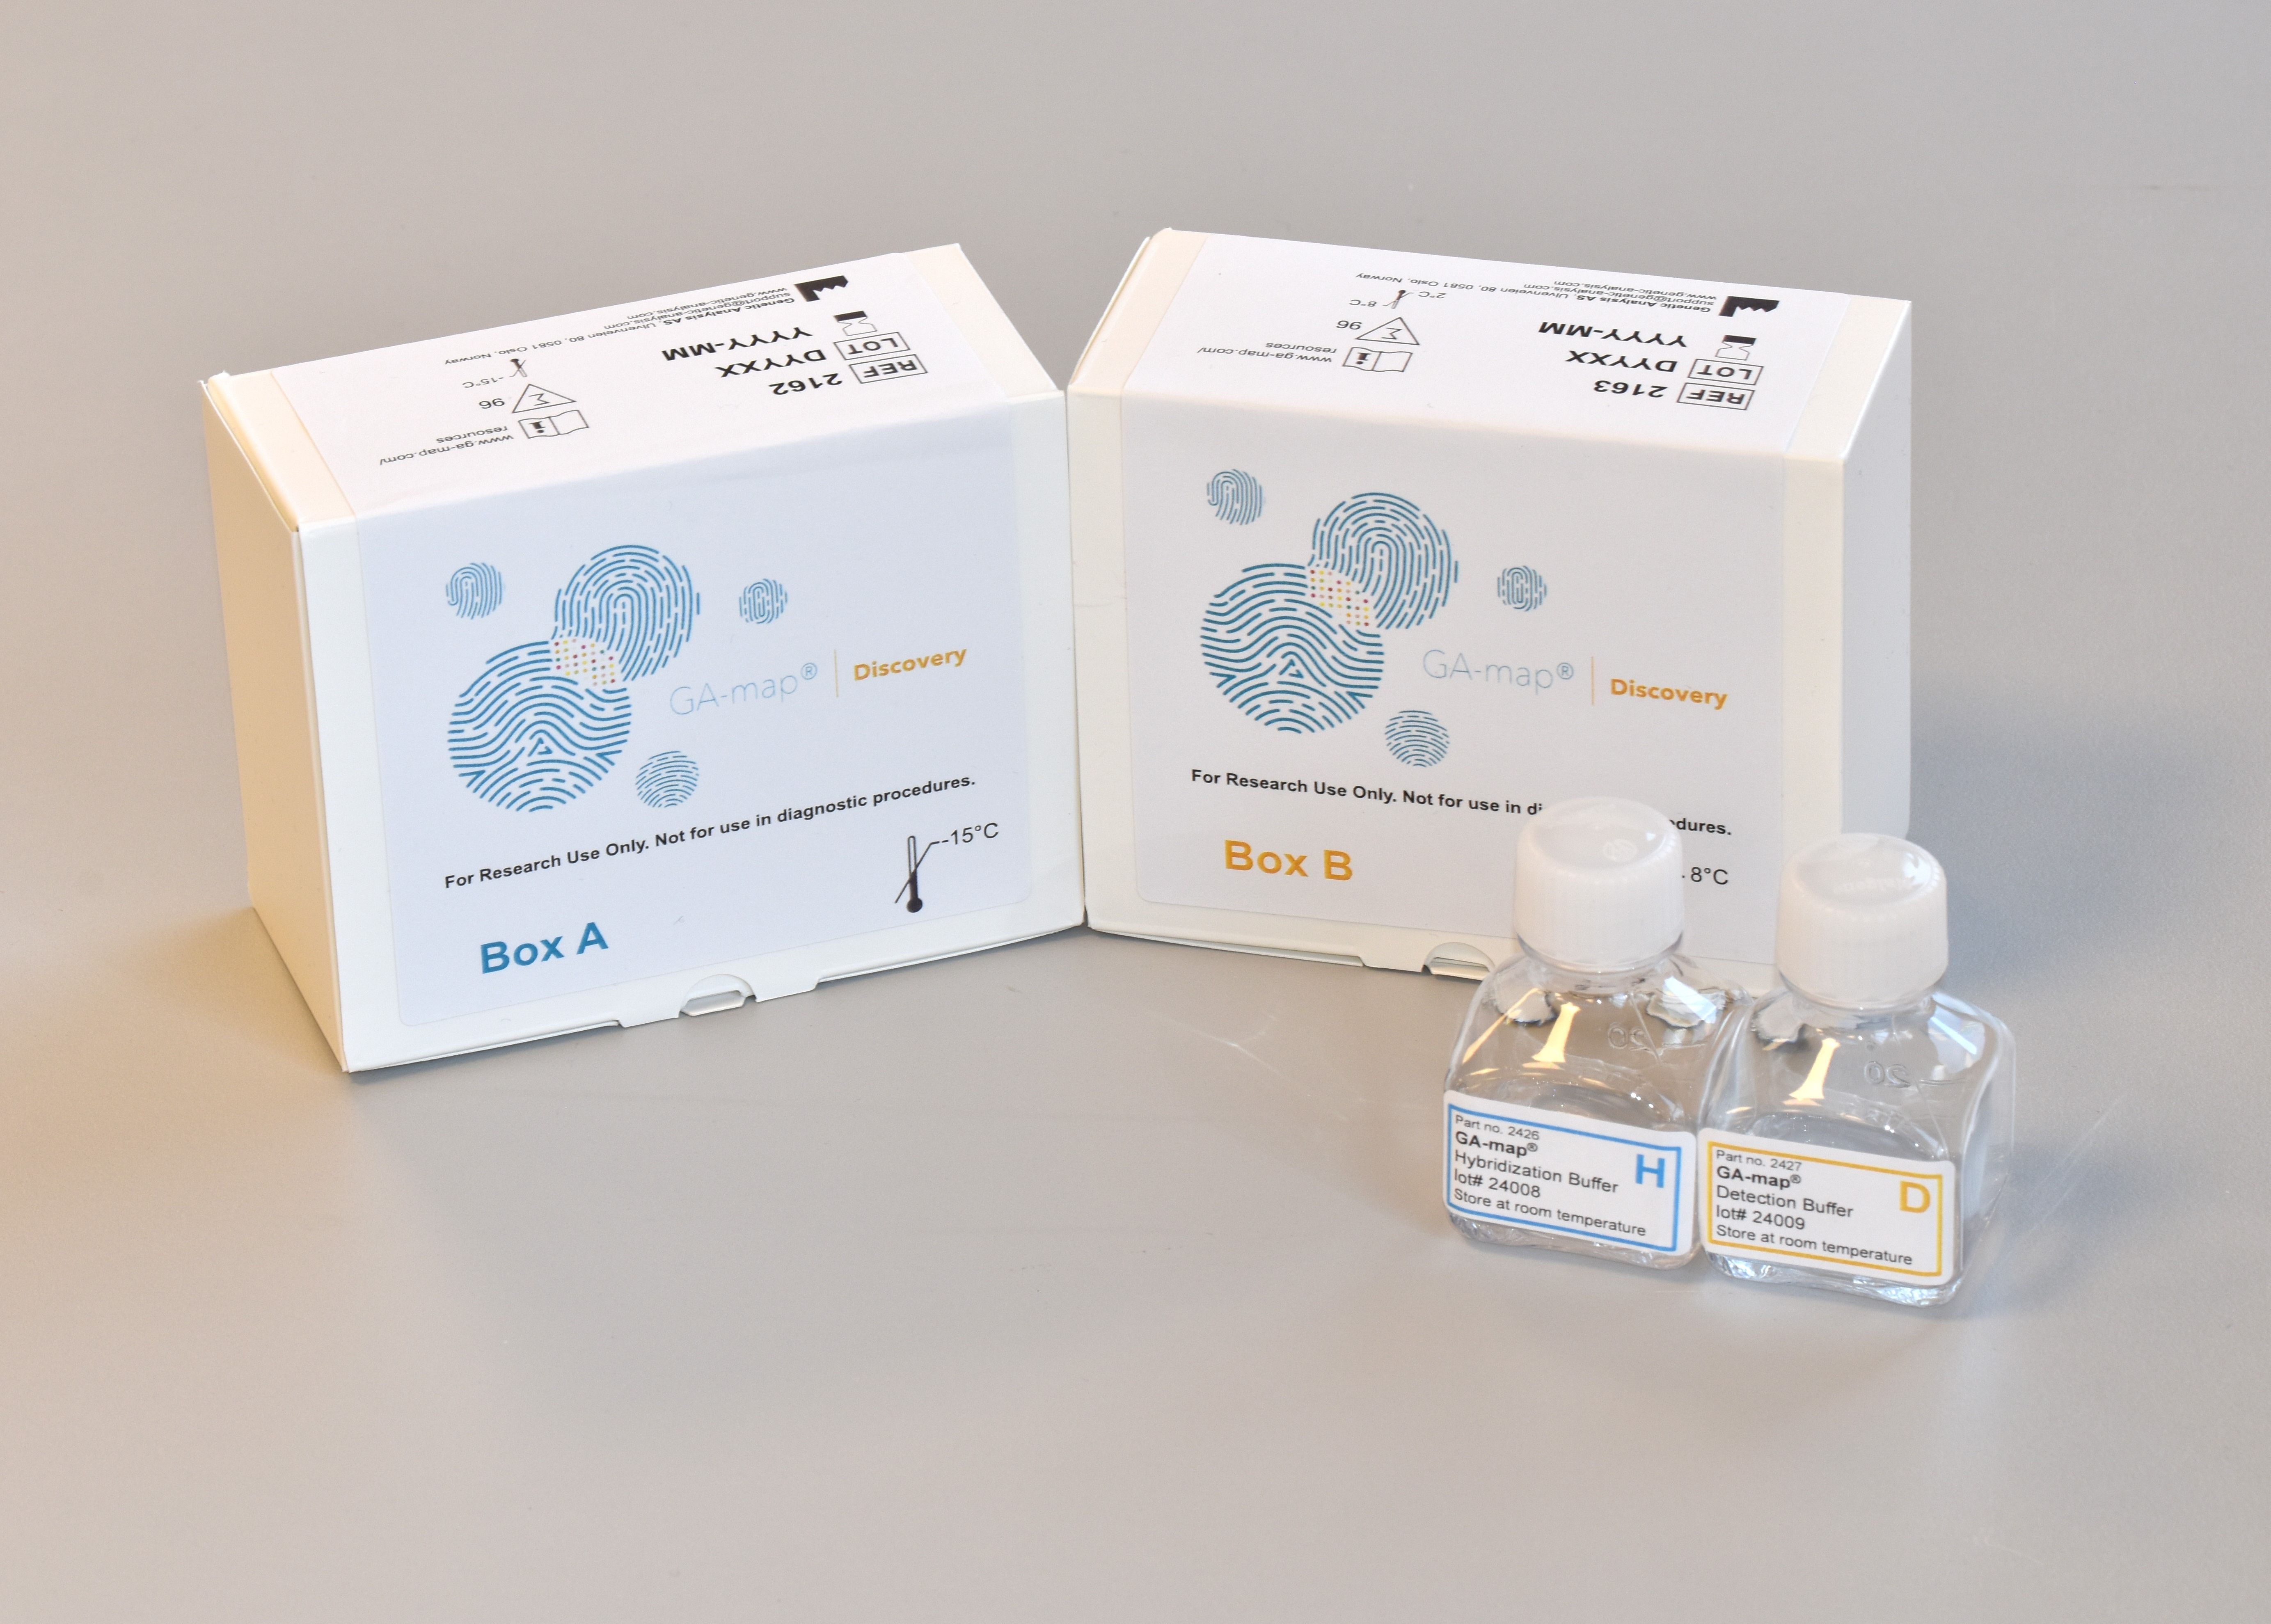 GA-map® Discovery - reagent kit for high multiplex microbiome analysis.